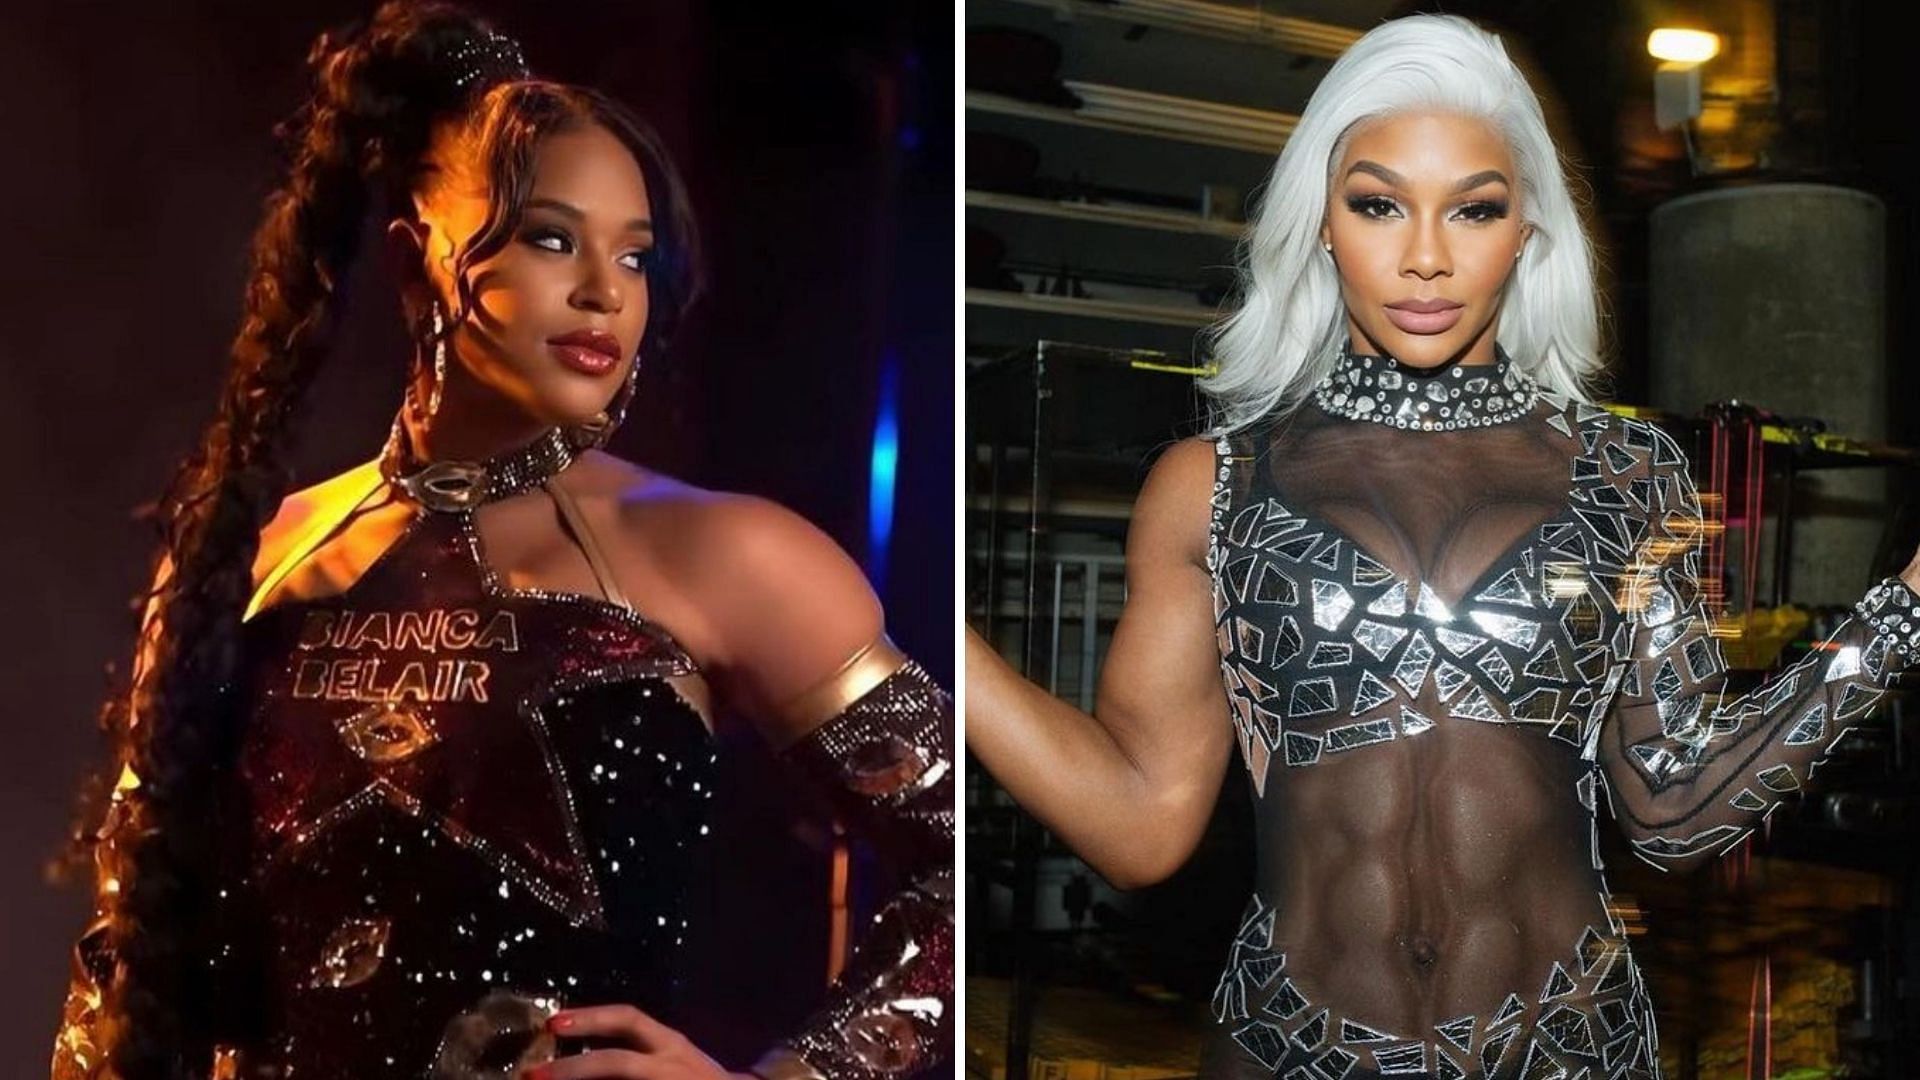 Fans would love to see Bianca Belair and Jade Cargill go head-to-head